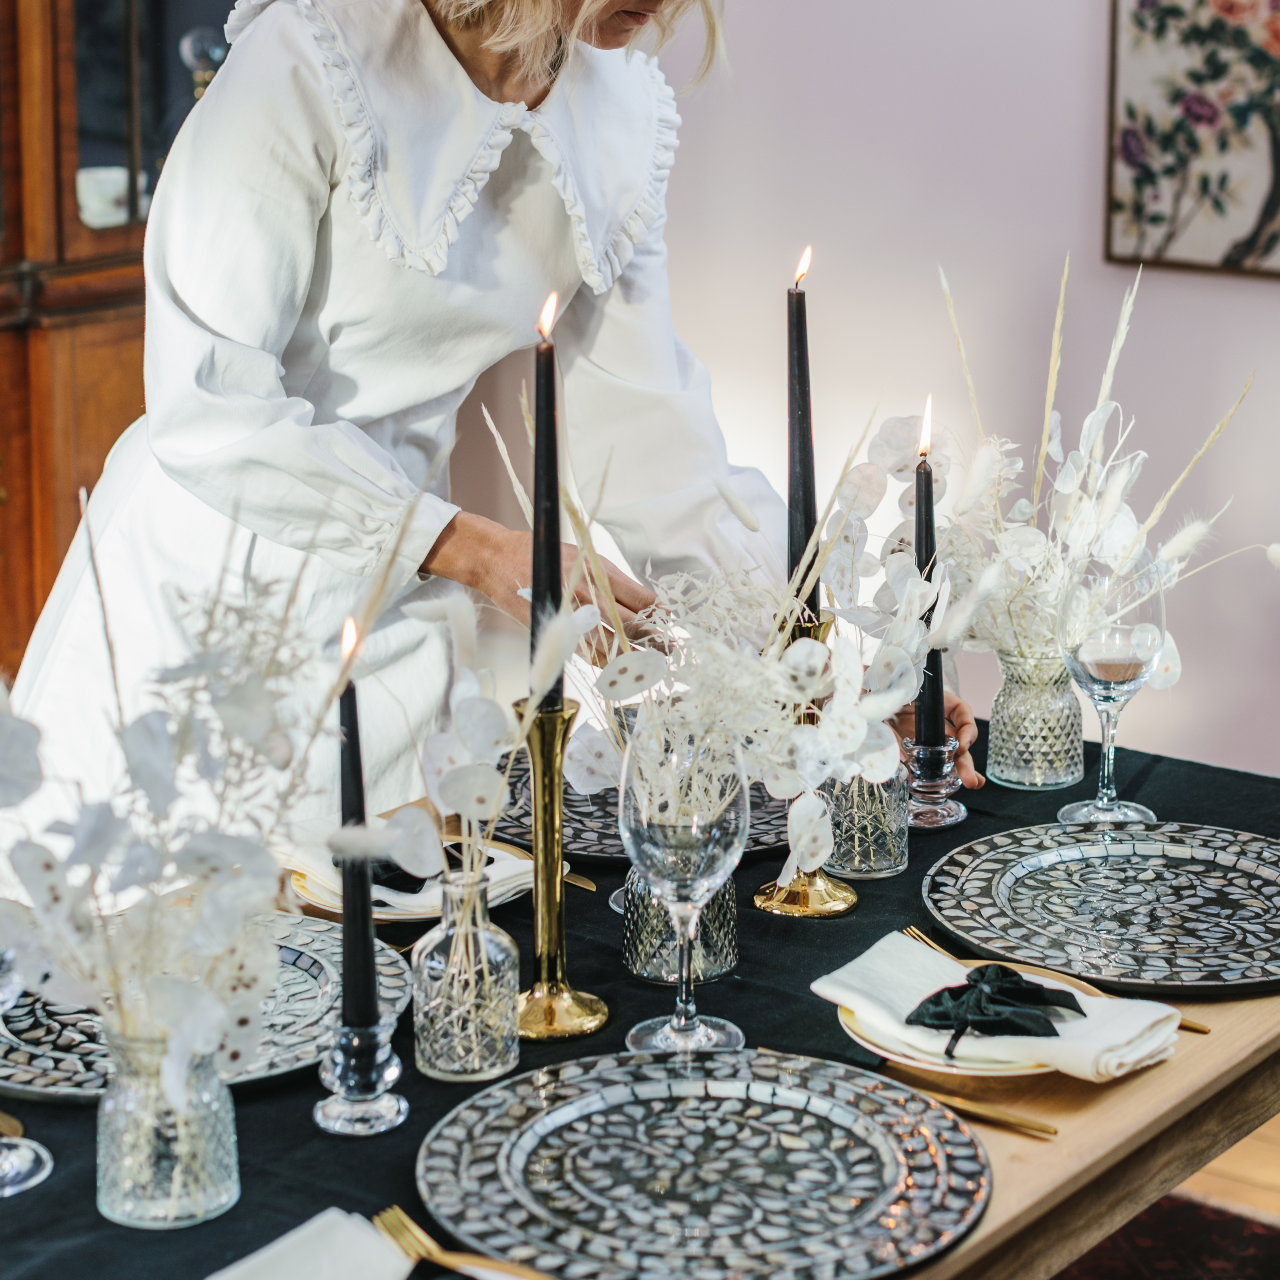 Side view of monochrome tablescape in a box table décor collection including black and white mother of pearl charger plates, sleek brass candlesticks, black tapered dinner candles, cut glass bud vases and dried flower displays with bunny tail and grasses